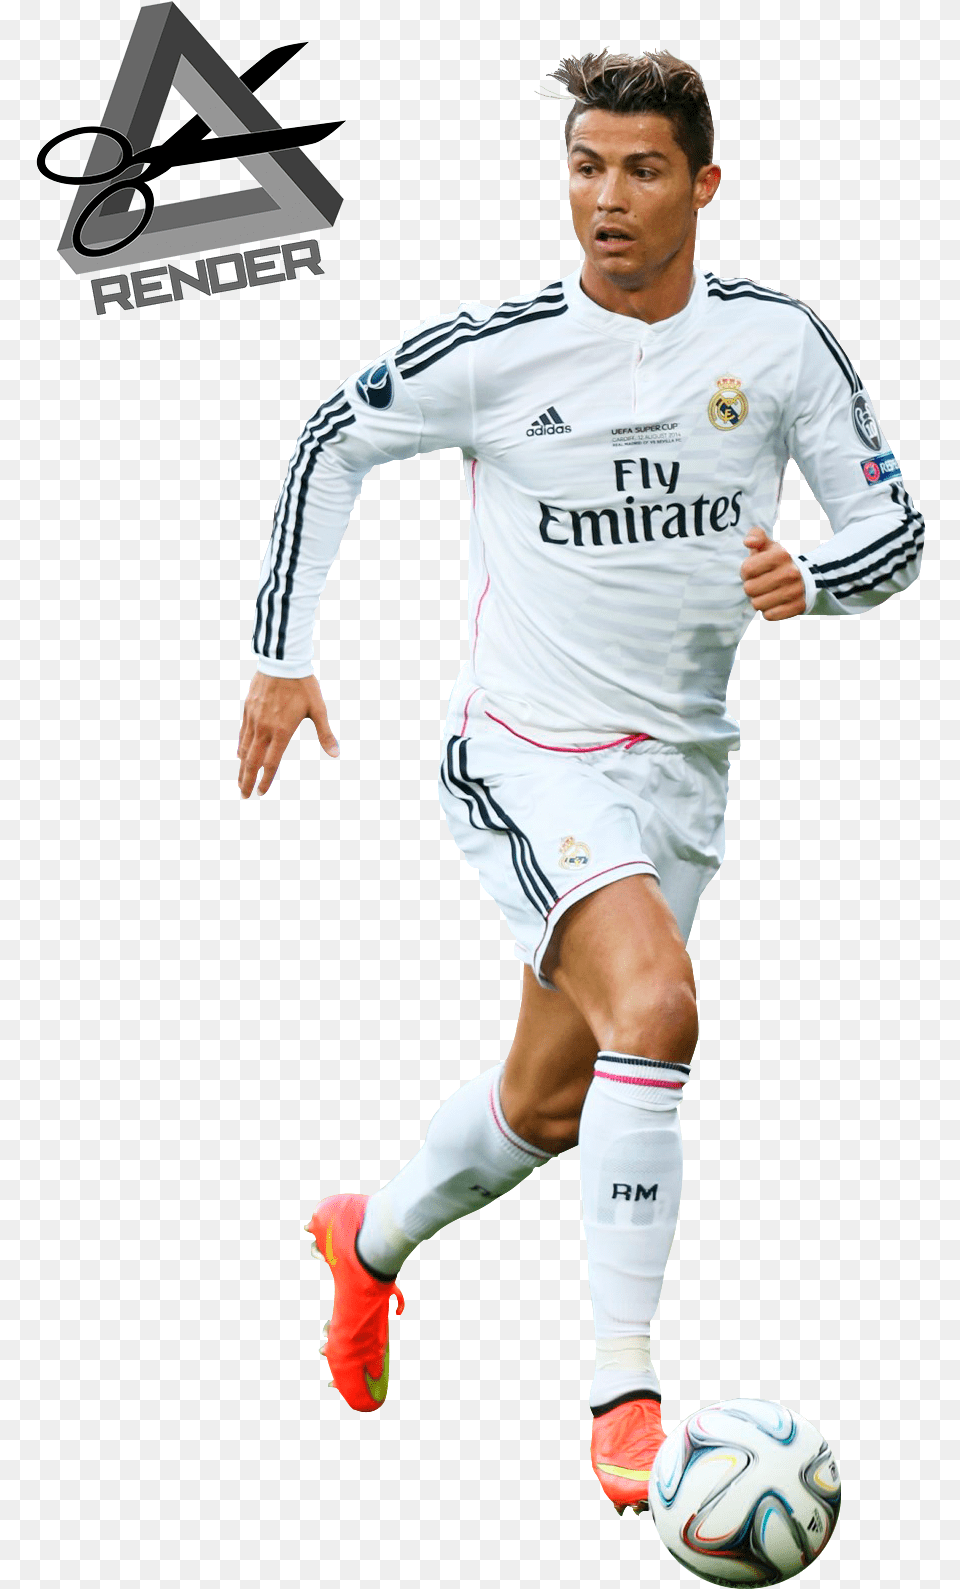 Real Madrid Iphone Wallpaper Ronaldo Hd Images 2015, Ball, Sport, Soccer Ball, Soccer Free Png Download